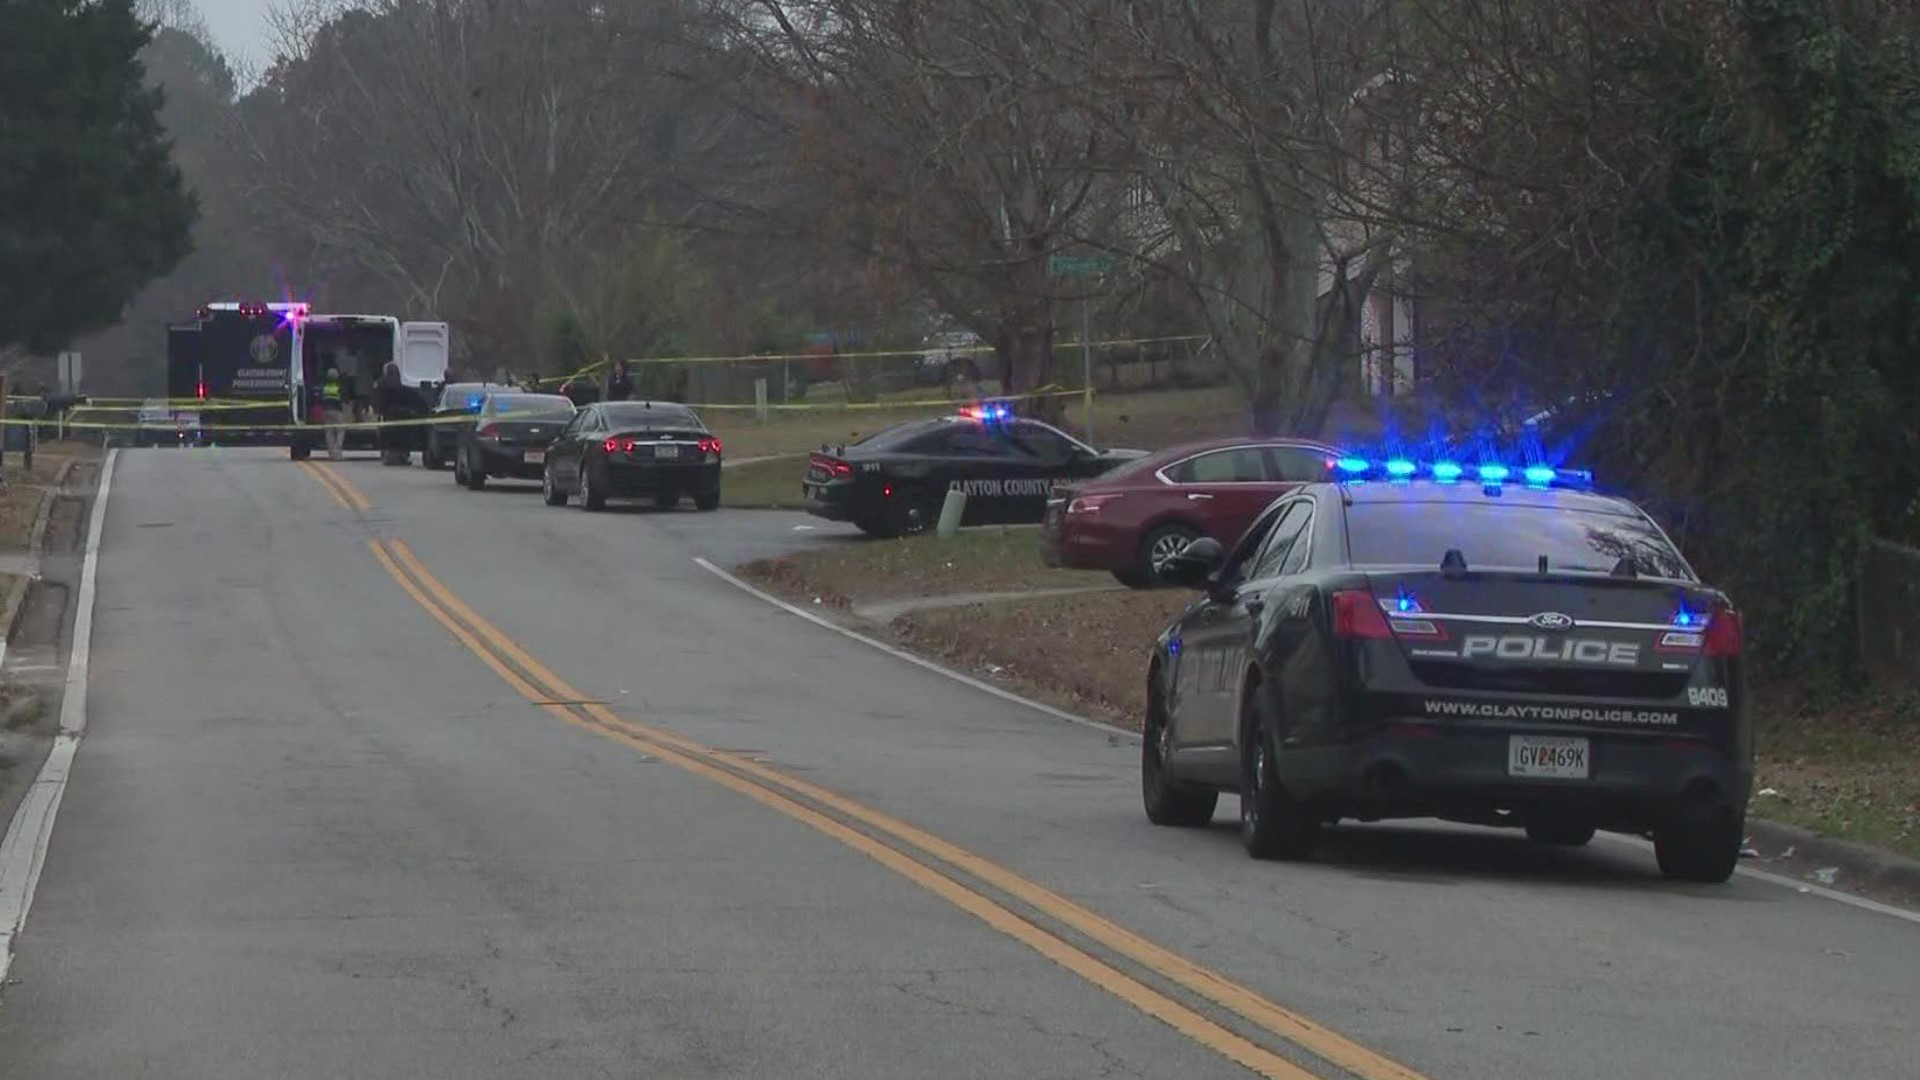 The Georgia Bureau of Investigation is gathering details after a man was shot and killed by police in Clayton County on Sunday.